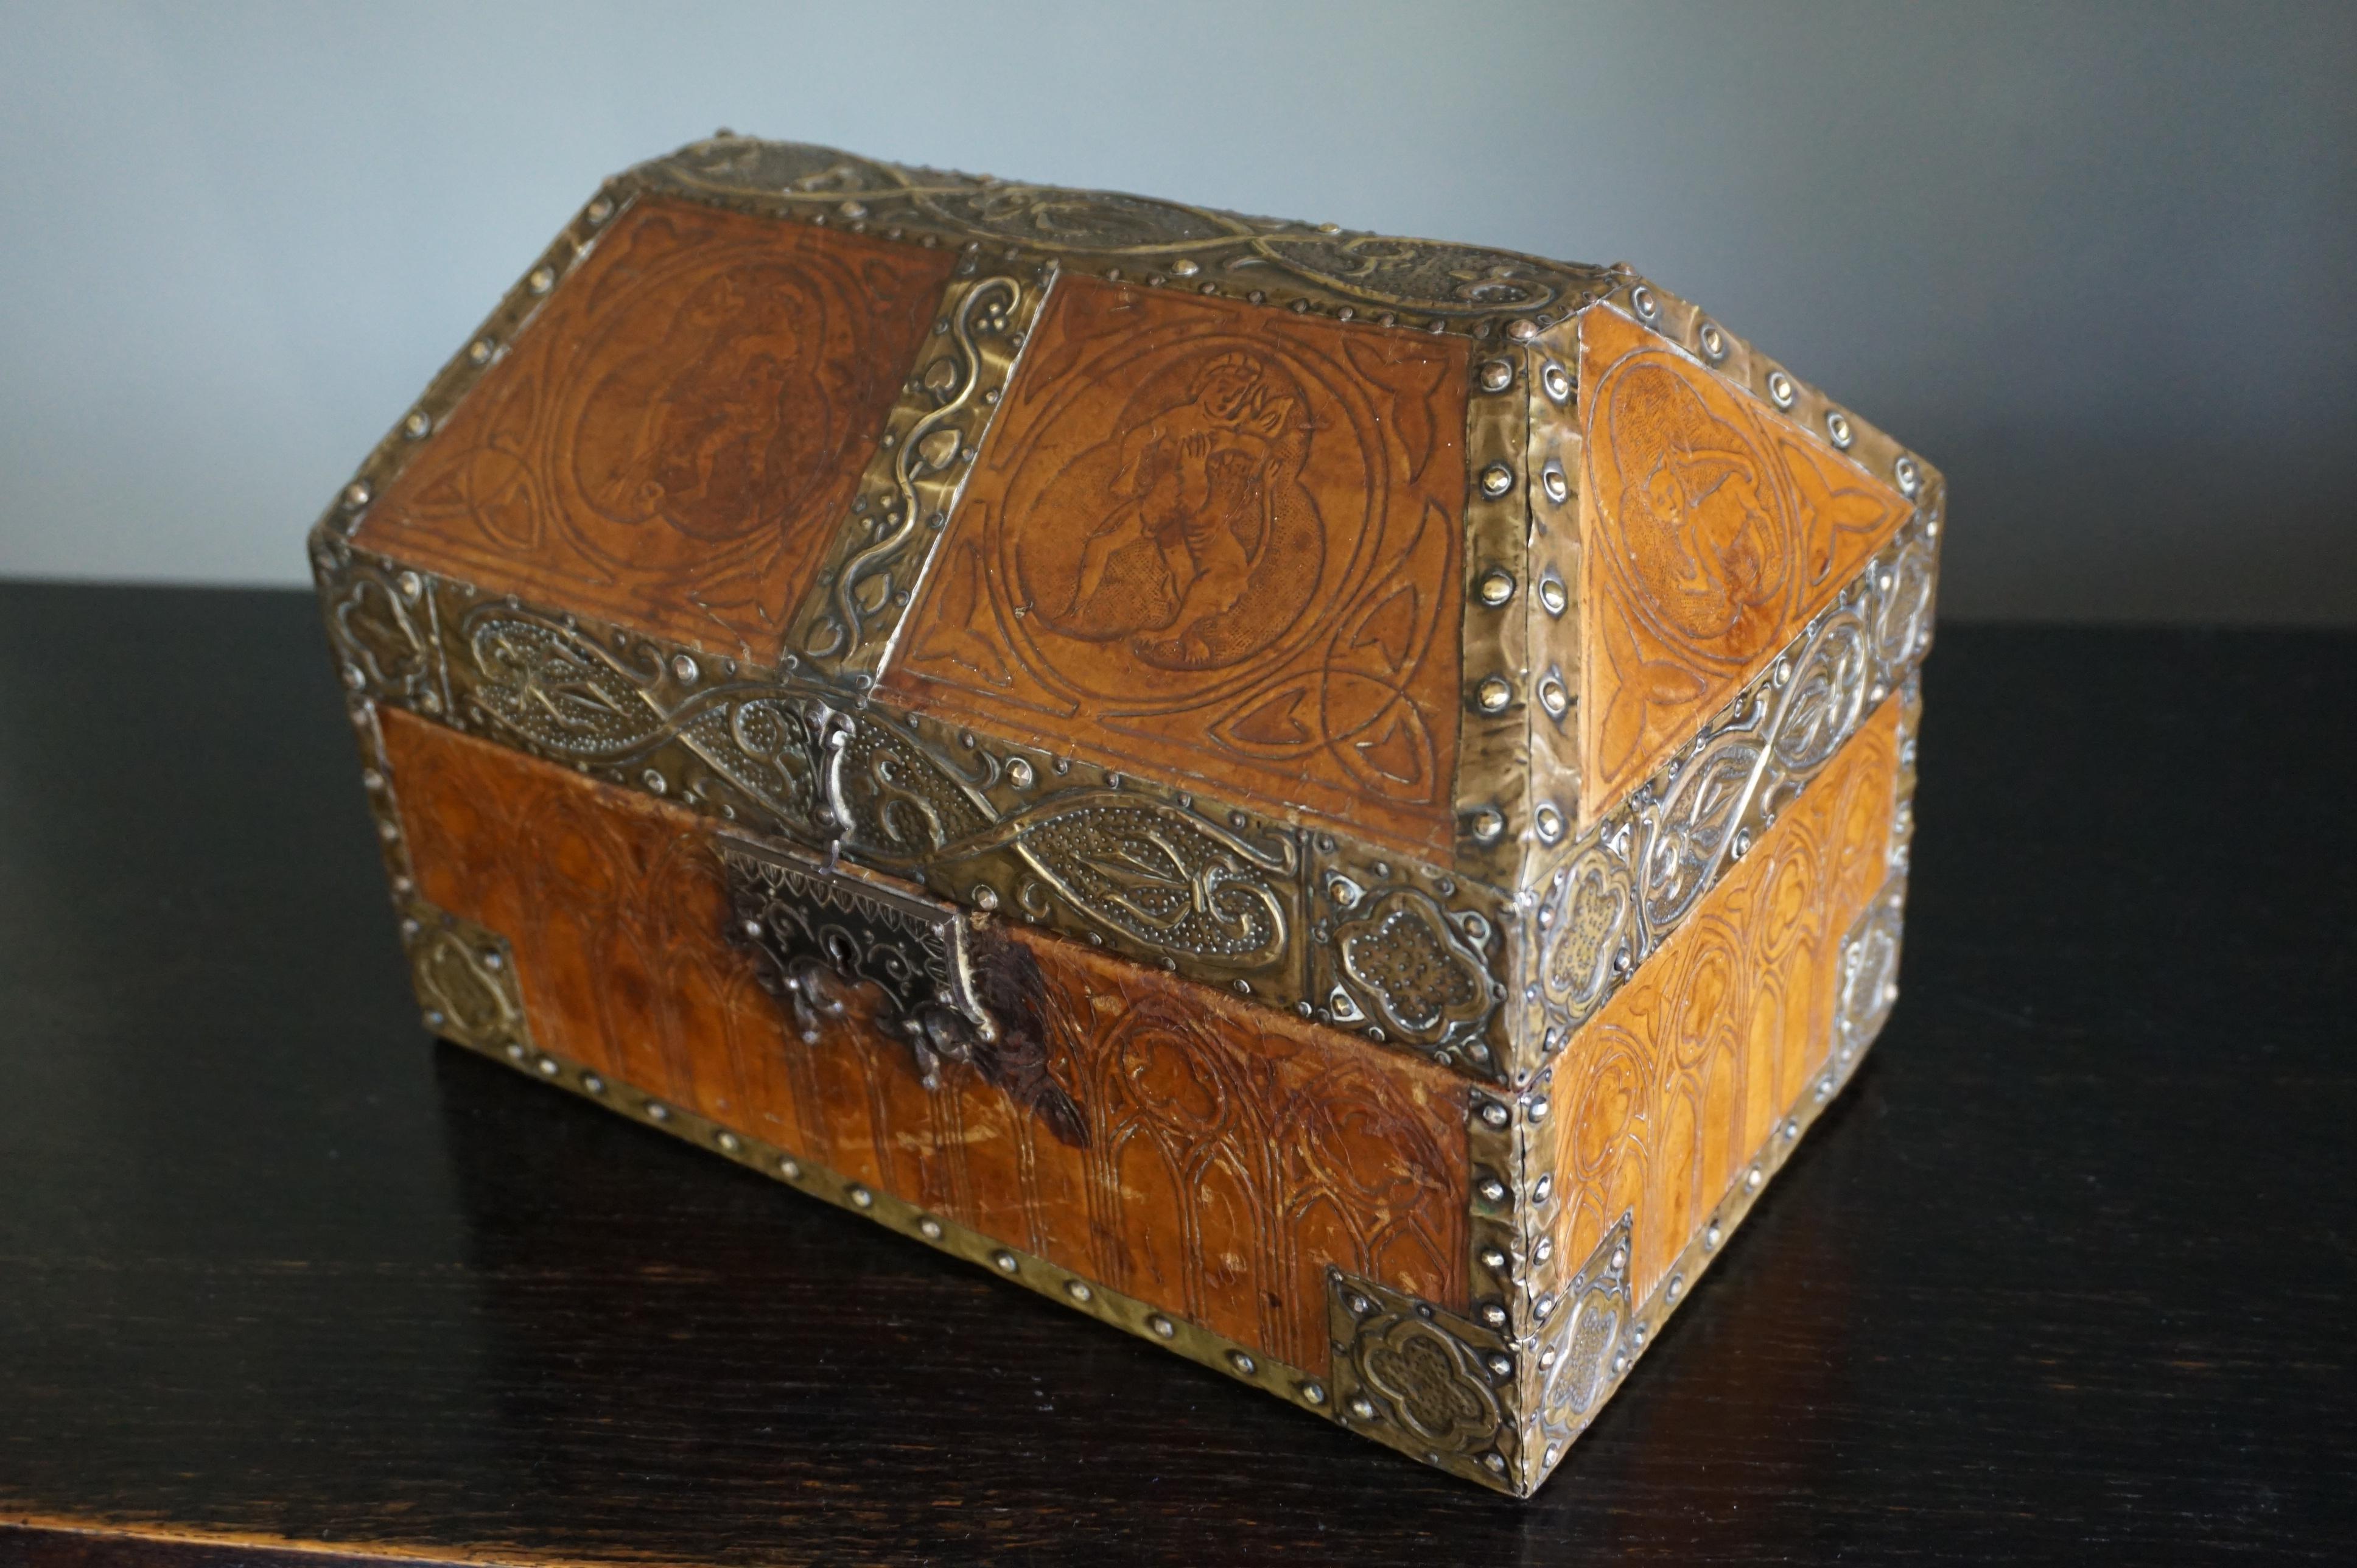 French Antique Handcrafted Late 1800s Embossed Leather and Brass Gothic Revival Box